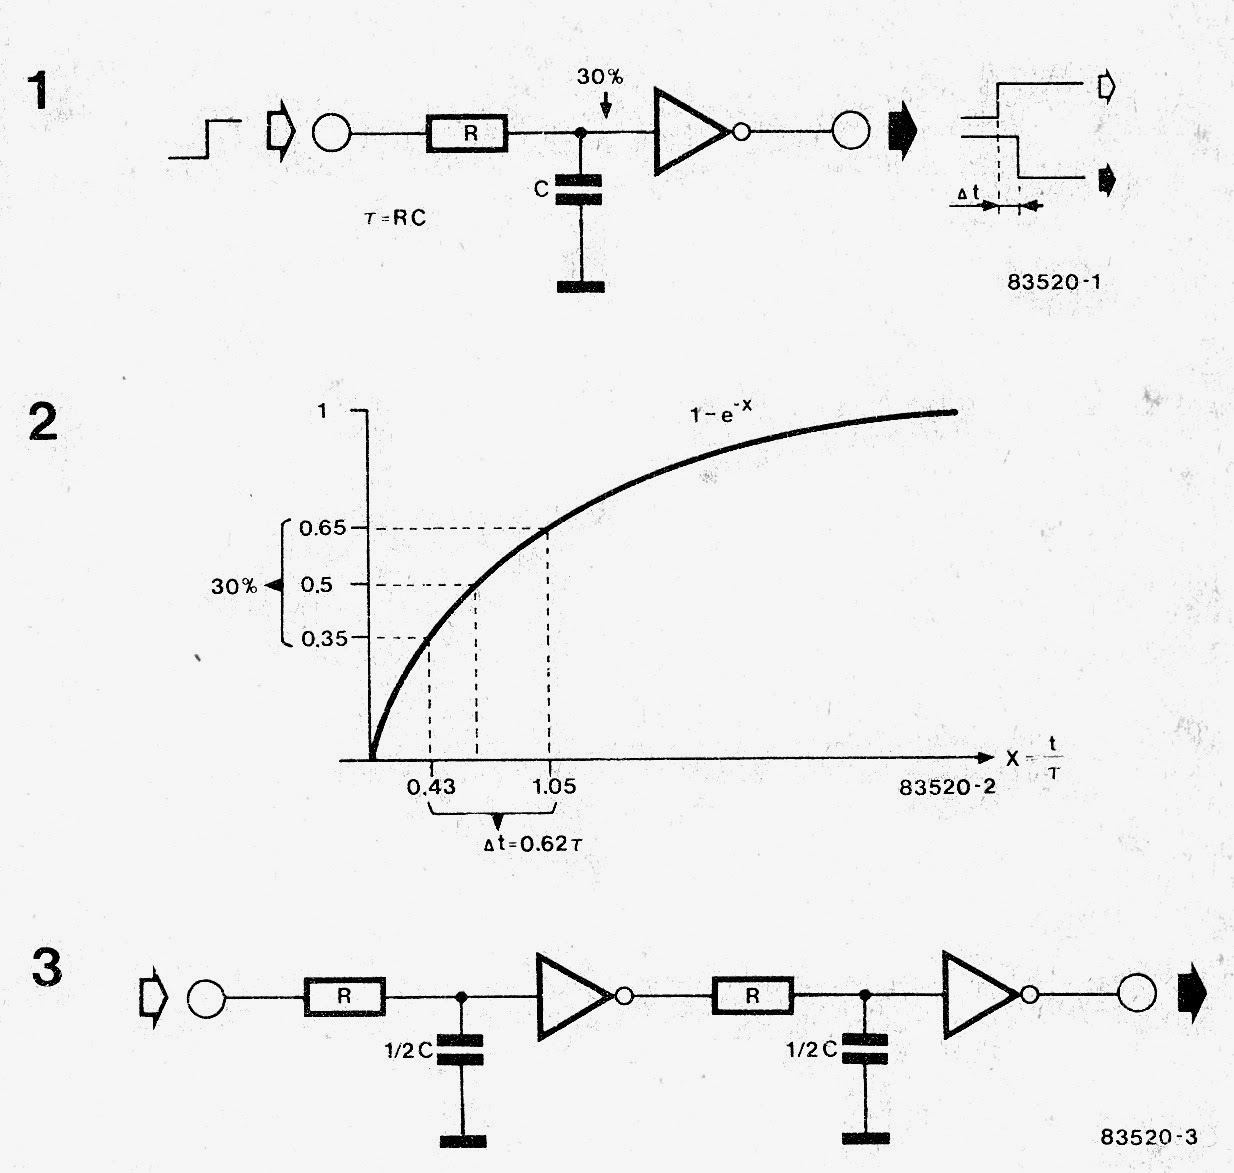 Simple Delay Timer Circuit - How to Make and Calculate | Schematics World